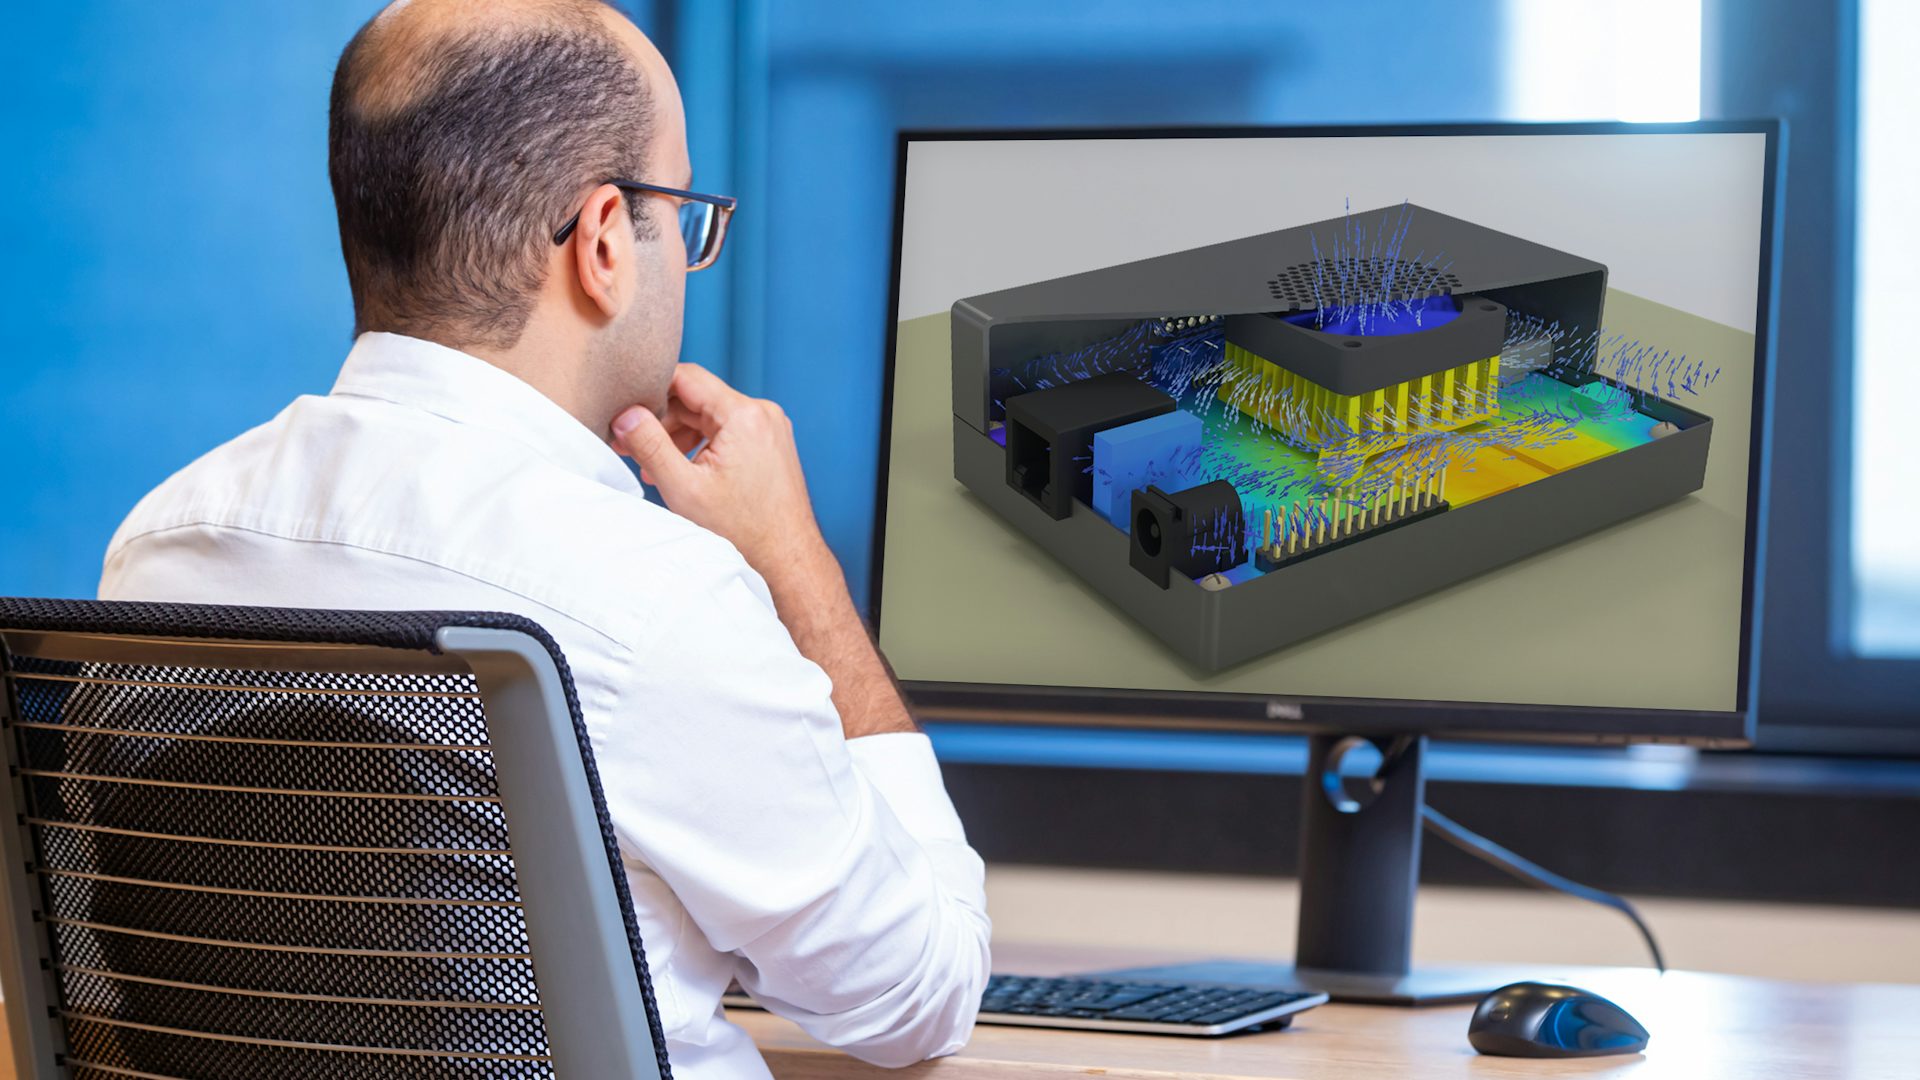 A man is looking at the Simcenter electronics cooling CFD and multiphysics software tool on a screen.